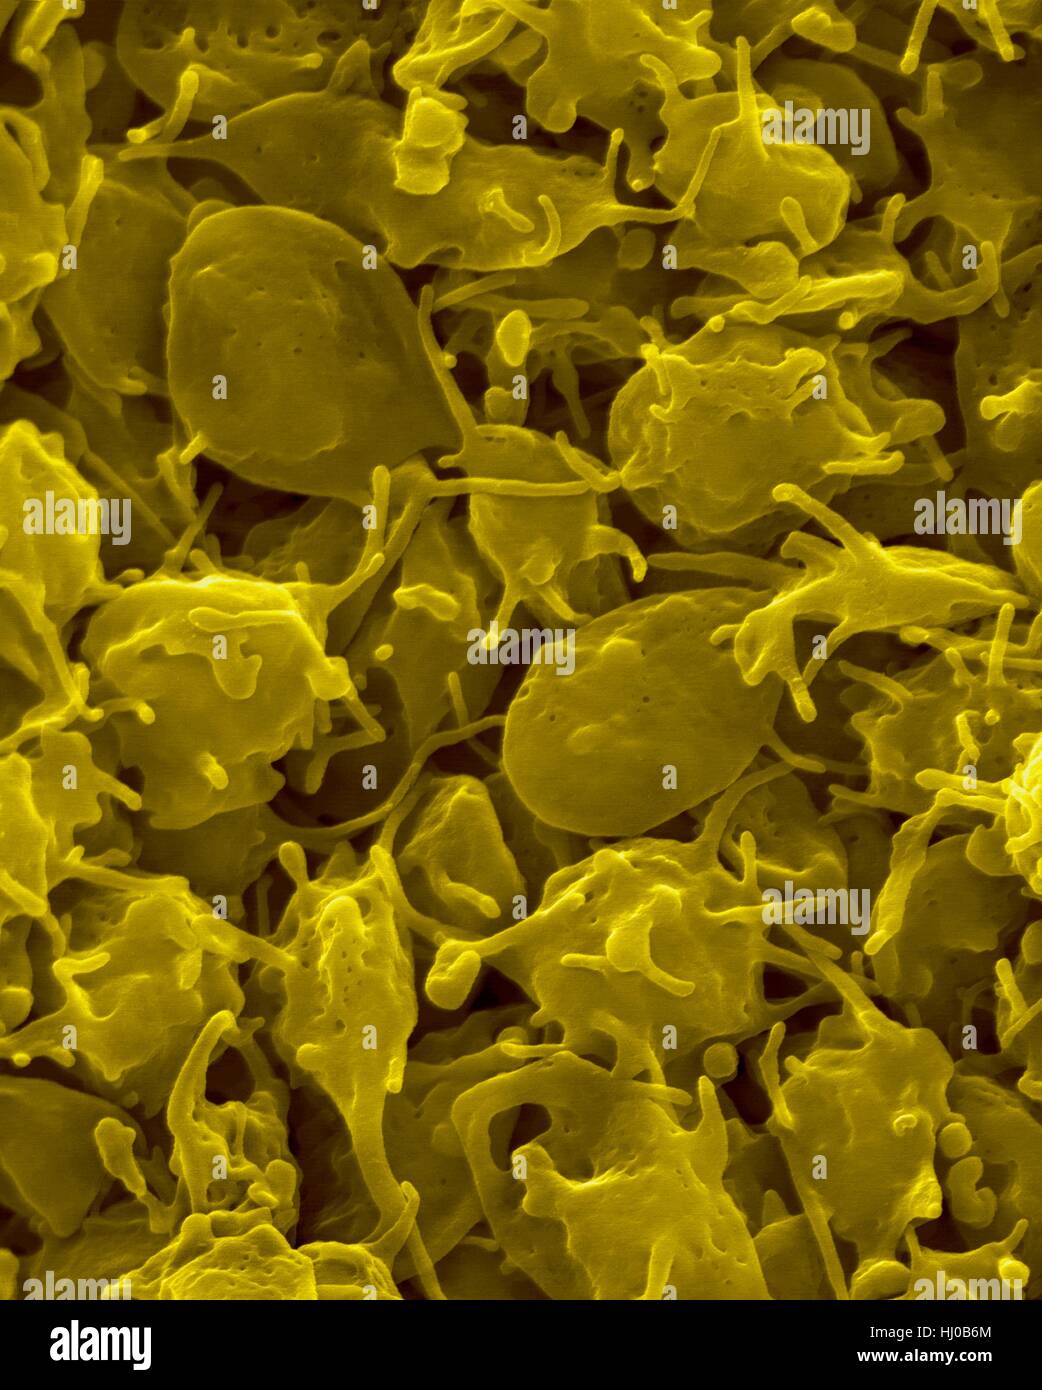 Activated platelets channels of open canalicular system (OCS),coloured scanning electron micrograph (SEM).Platelets are blood cell fragments that play essential role in blood clotting wound repair,and can also activate certain immune responses.They are formed in red bone marrow,lungs,and spleen by Stock Photo